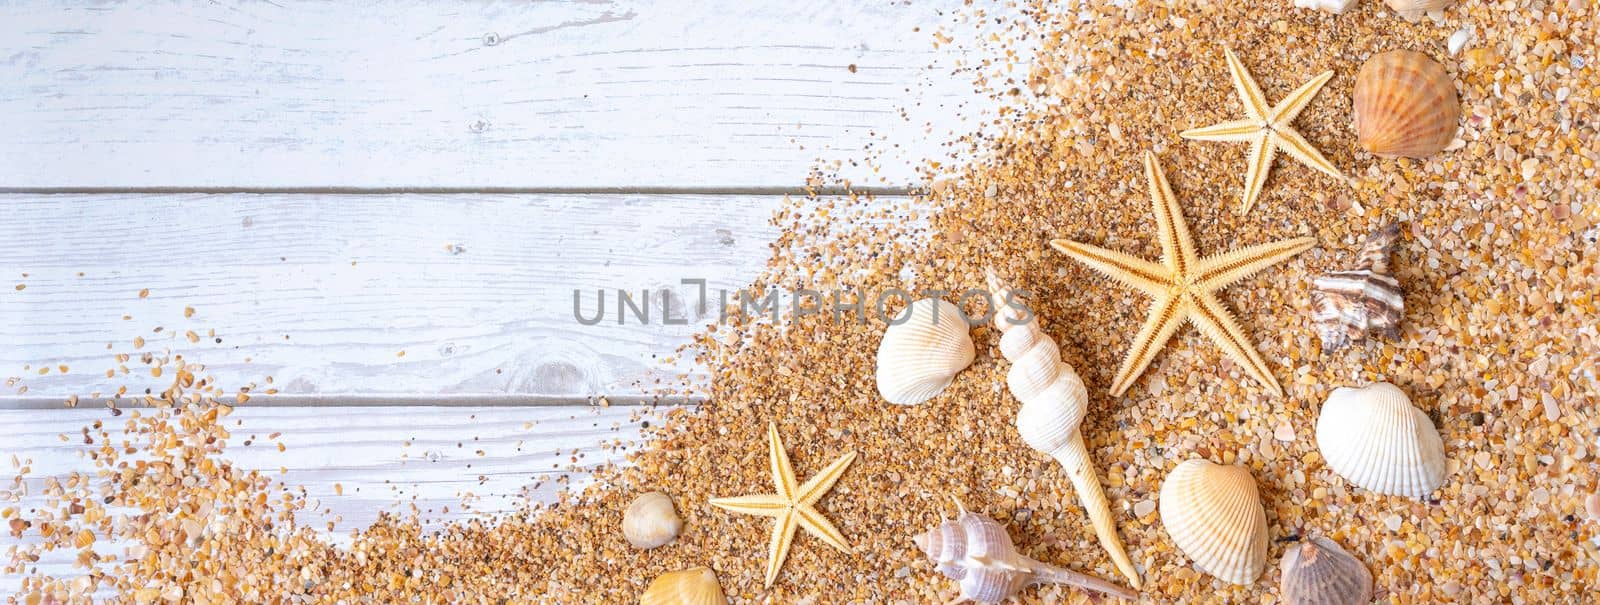 Sand seashells baner background. Summer time concept with sea shells and starfish on wooden background and sand.